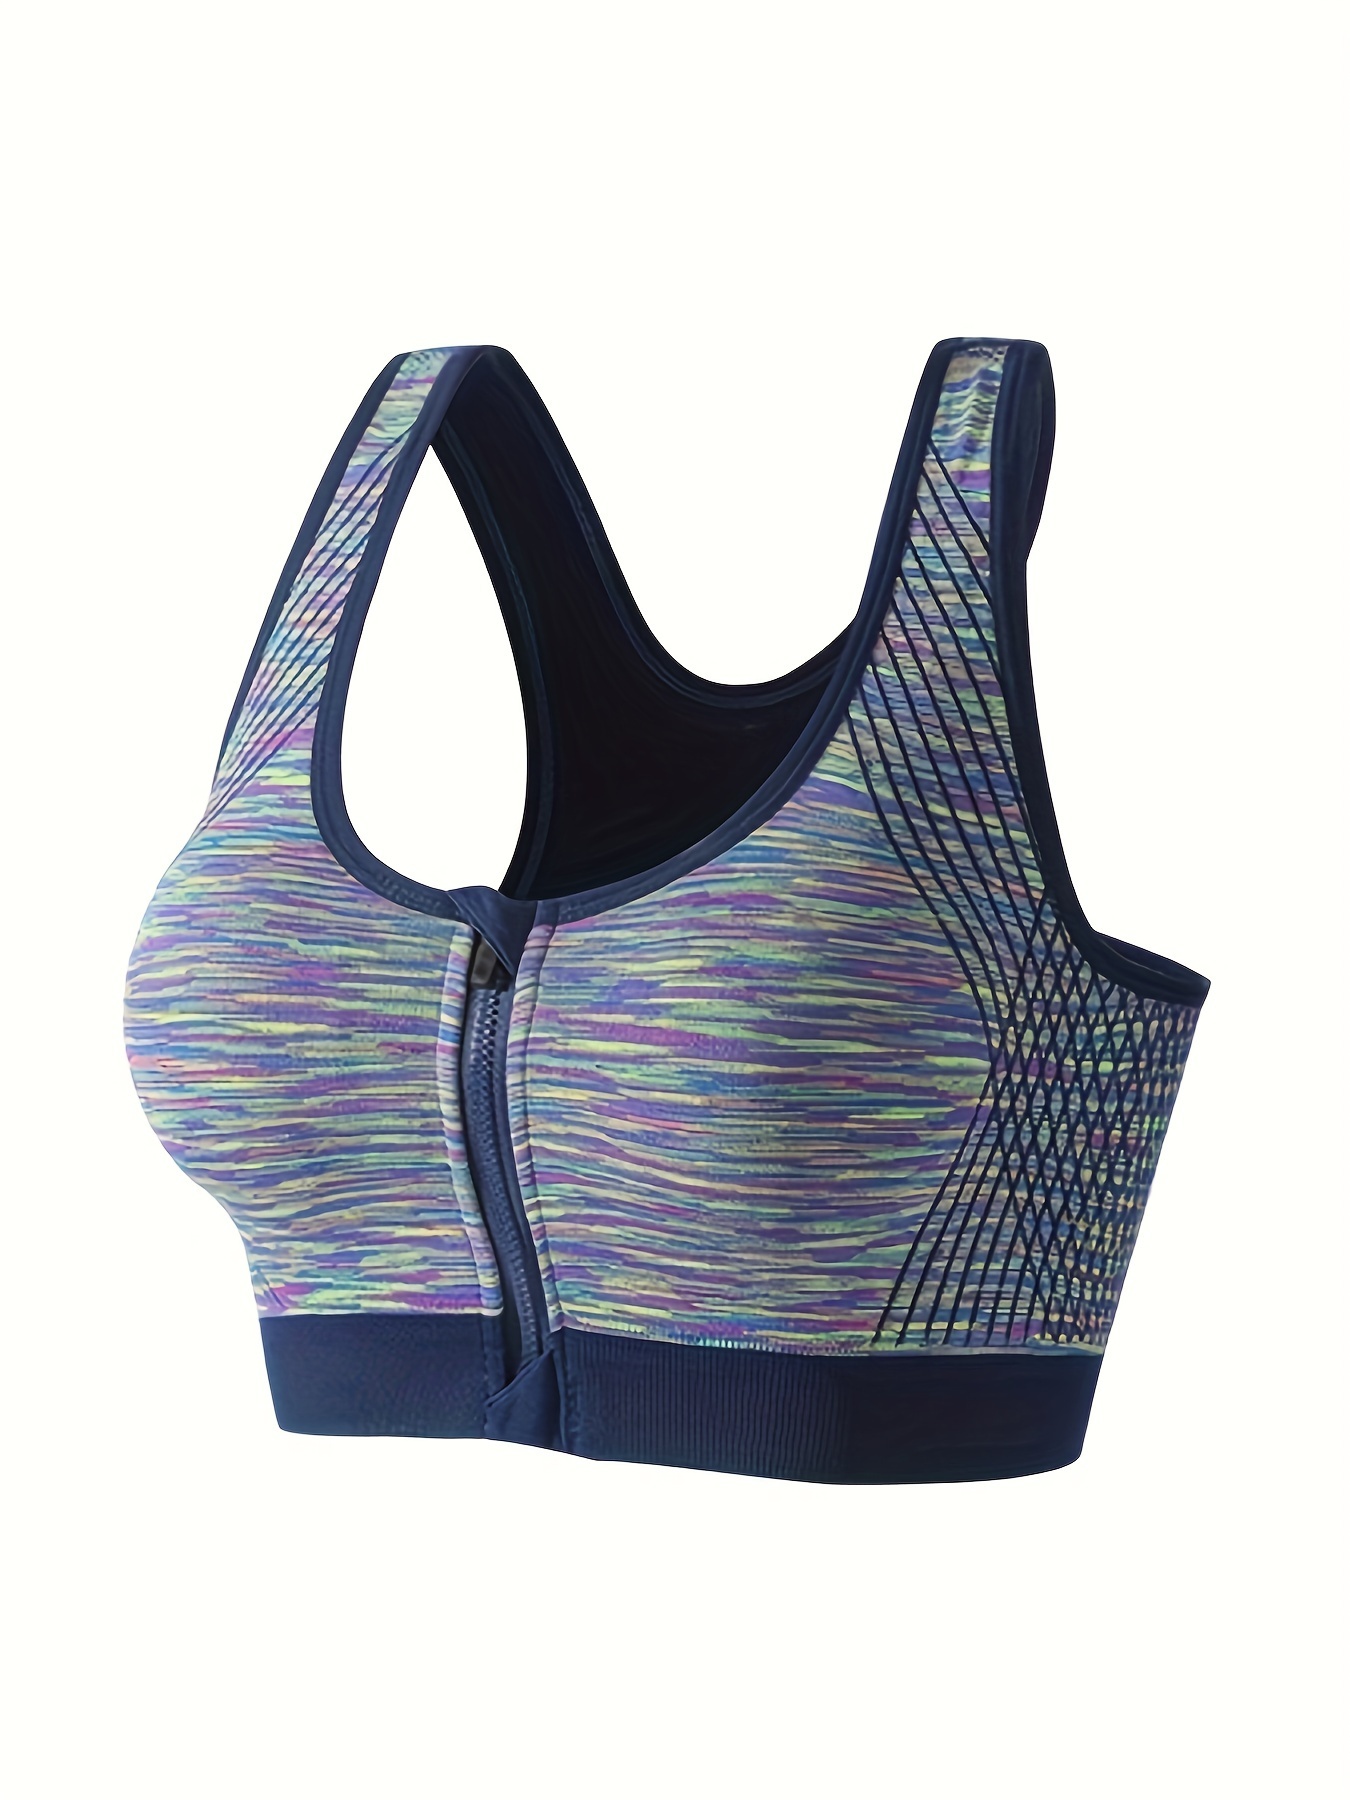 Tek Gear sports bra Racerback front zip athletic activewear sportswear gym  workout yoga Multiple - $23 New With Tags - From Viv